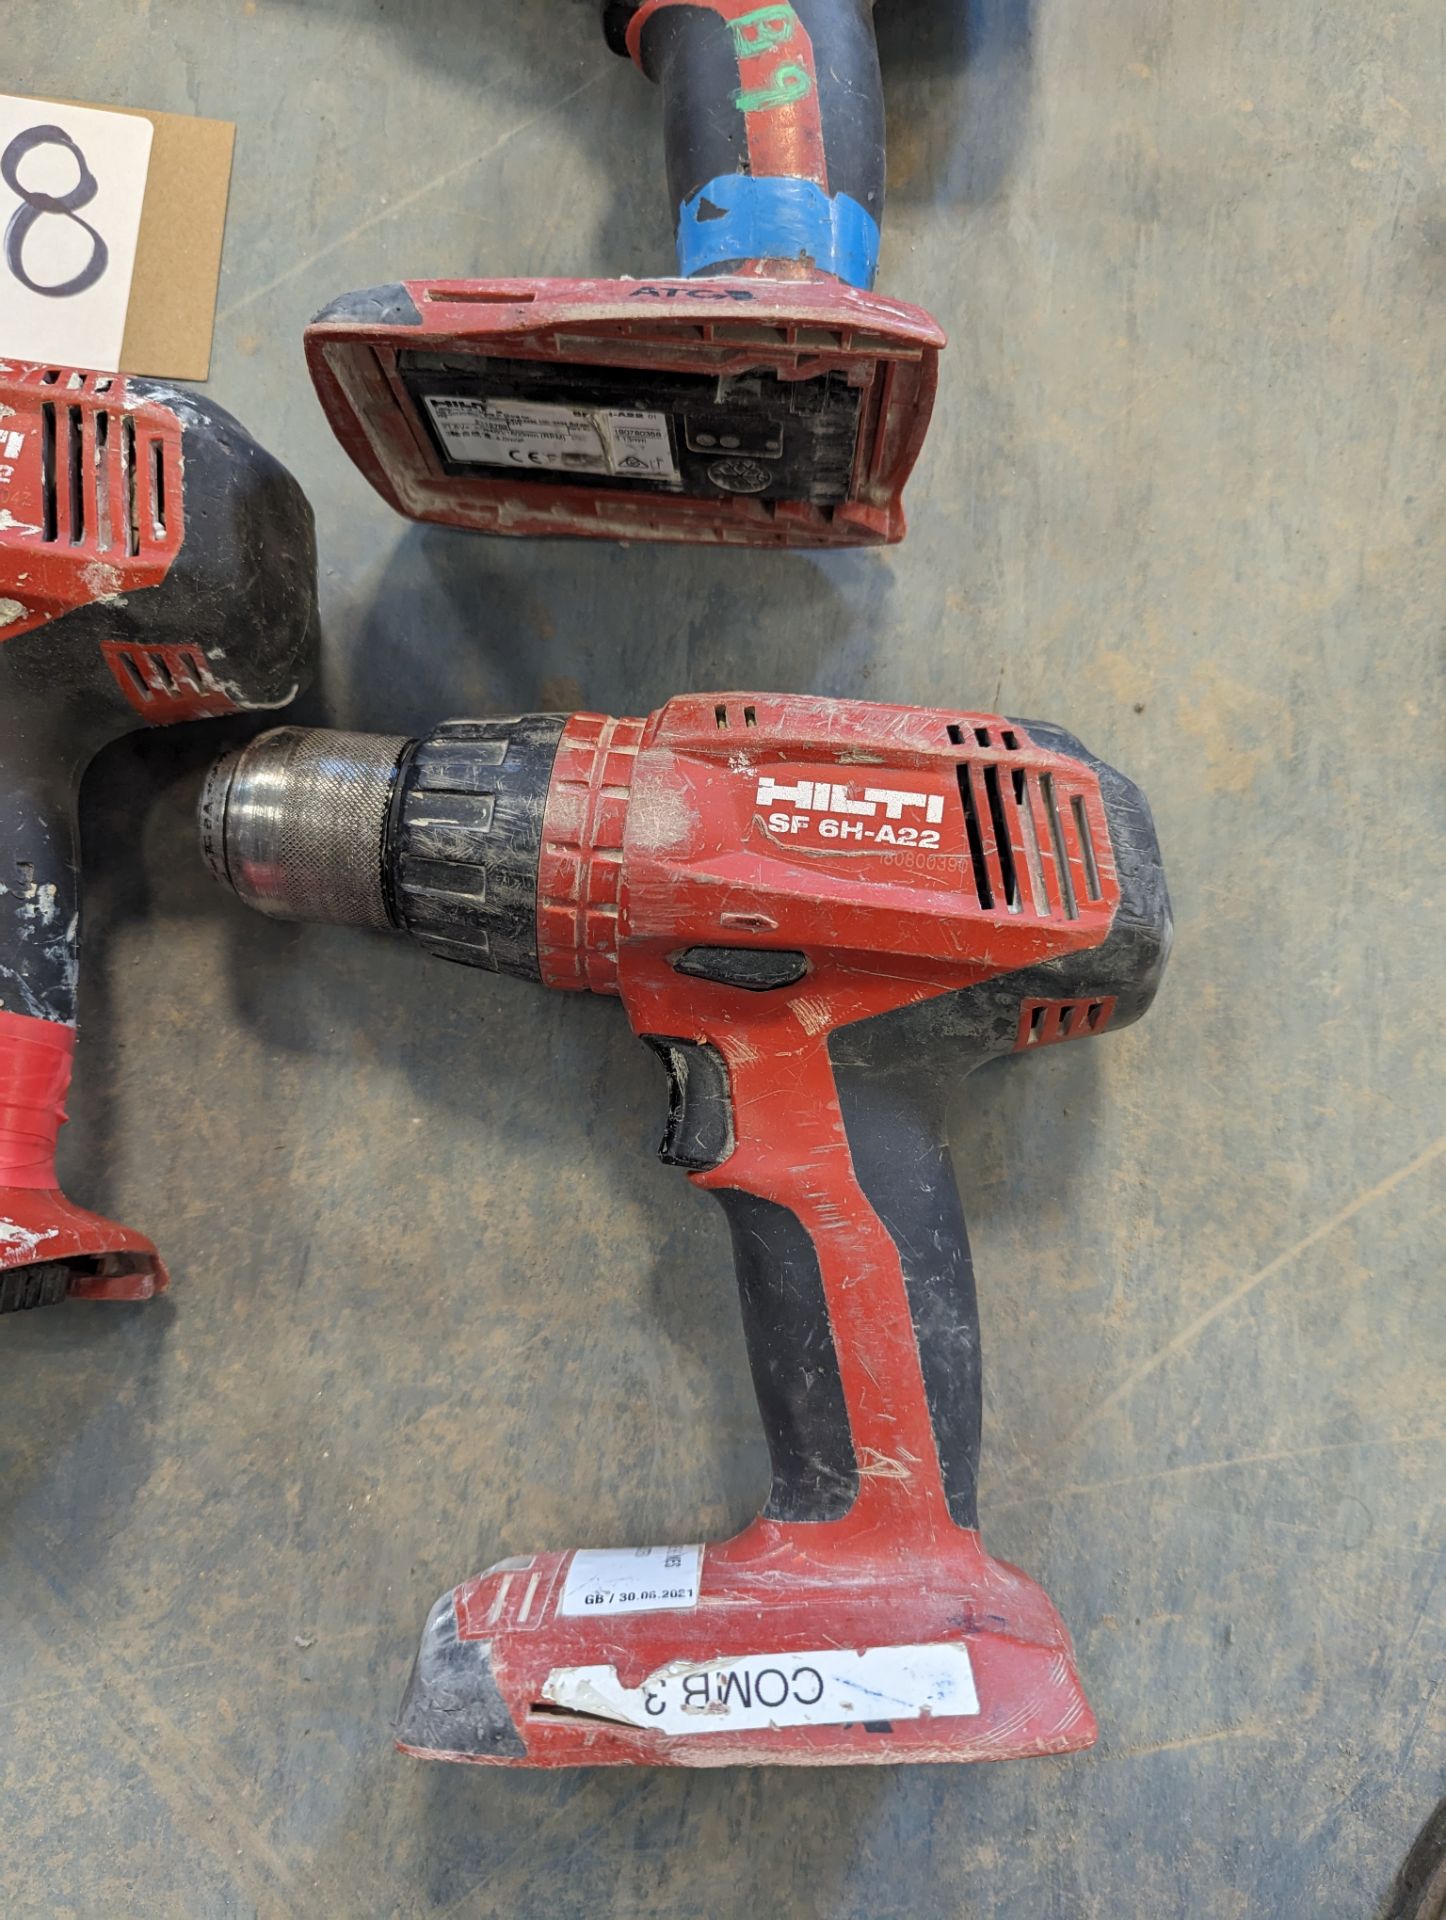 (5) Hilti SF 6H-A22 Cordless Hanner Drills with (2) Hilti C 4/36-MC4 Multi Bay Charger with 4 Batter - Image 2 of 5